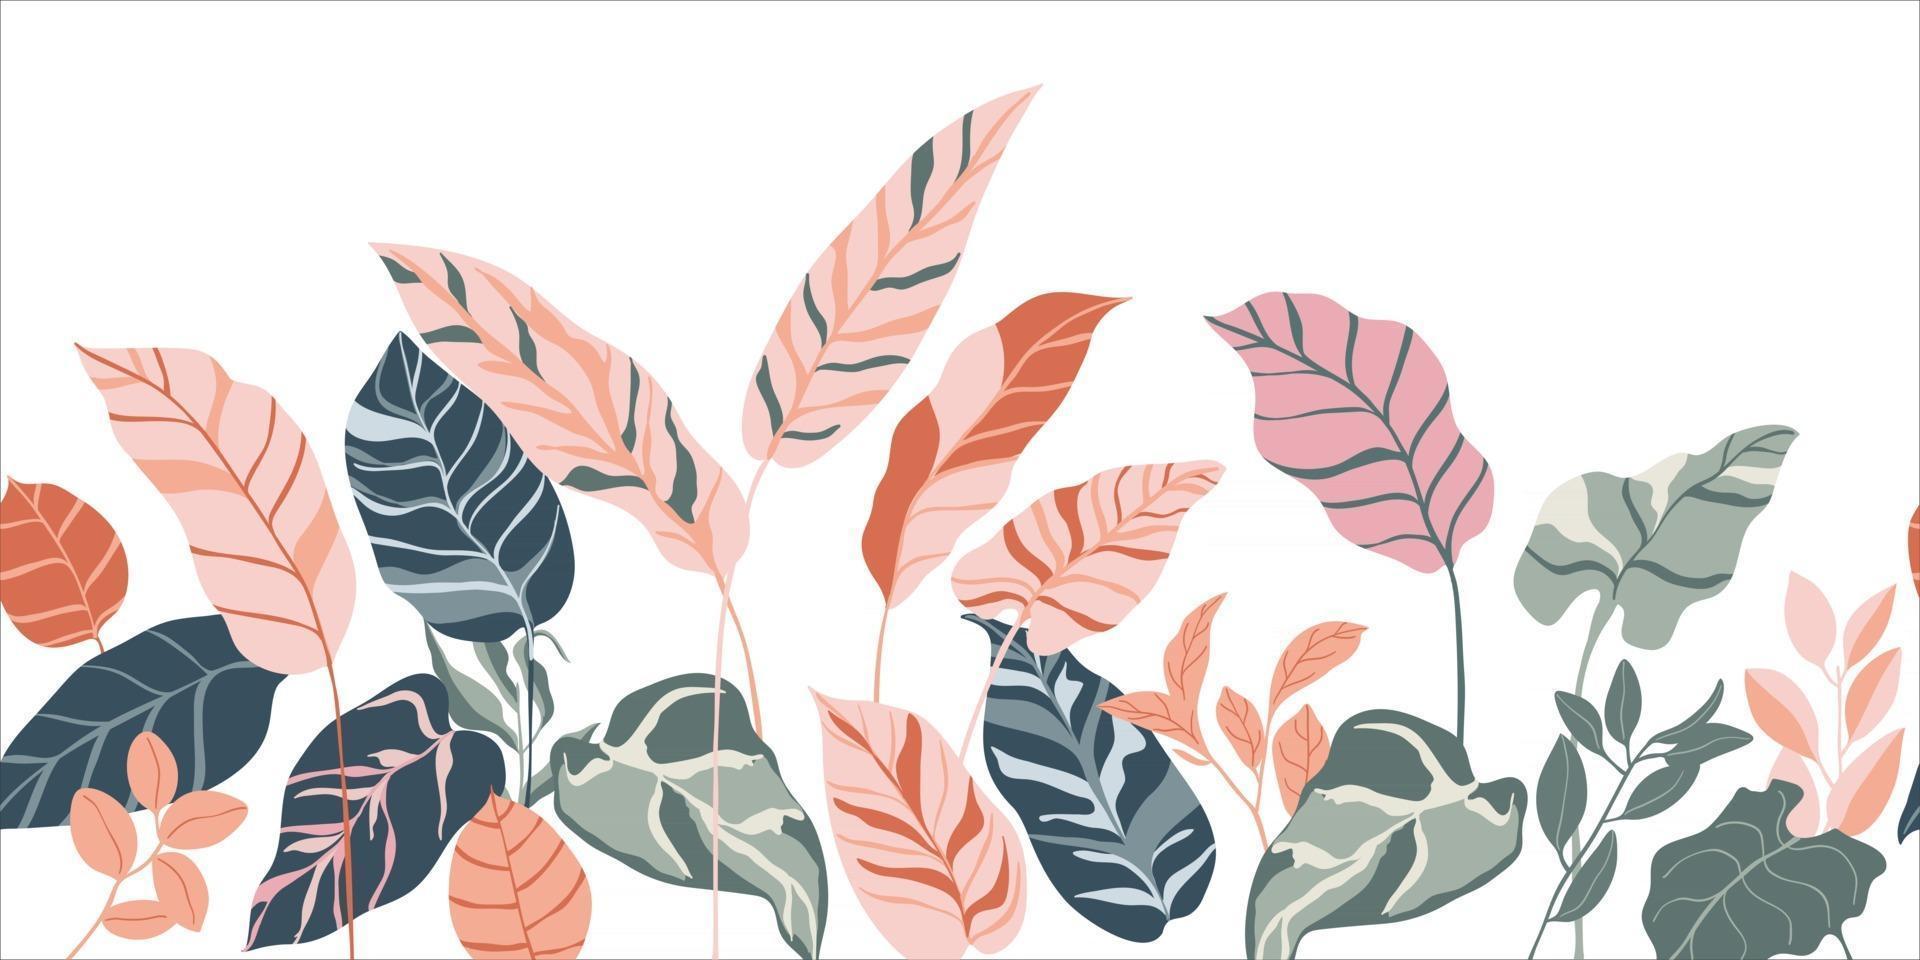 Tropical Forest Art Deco Wallpaper. Floral Pattern With Exotic Flowers And Leaves, Split Leaf Philodendron Plant , Monstera Plant, Jungle Plants Line Art On Trendy Background. Vector Illustration